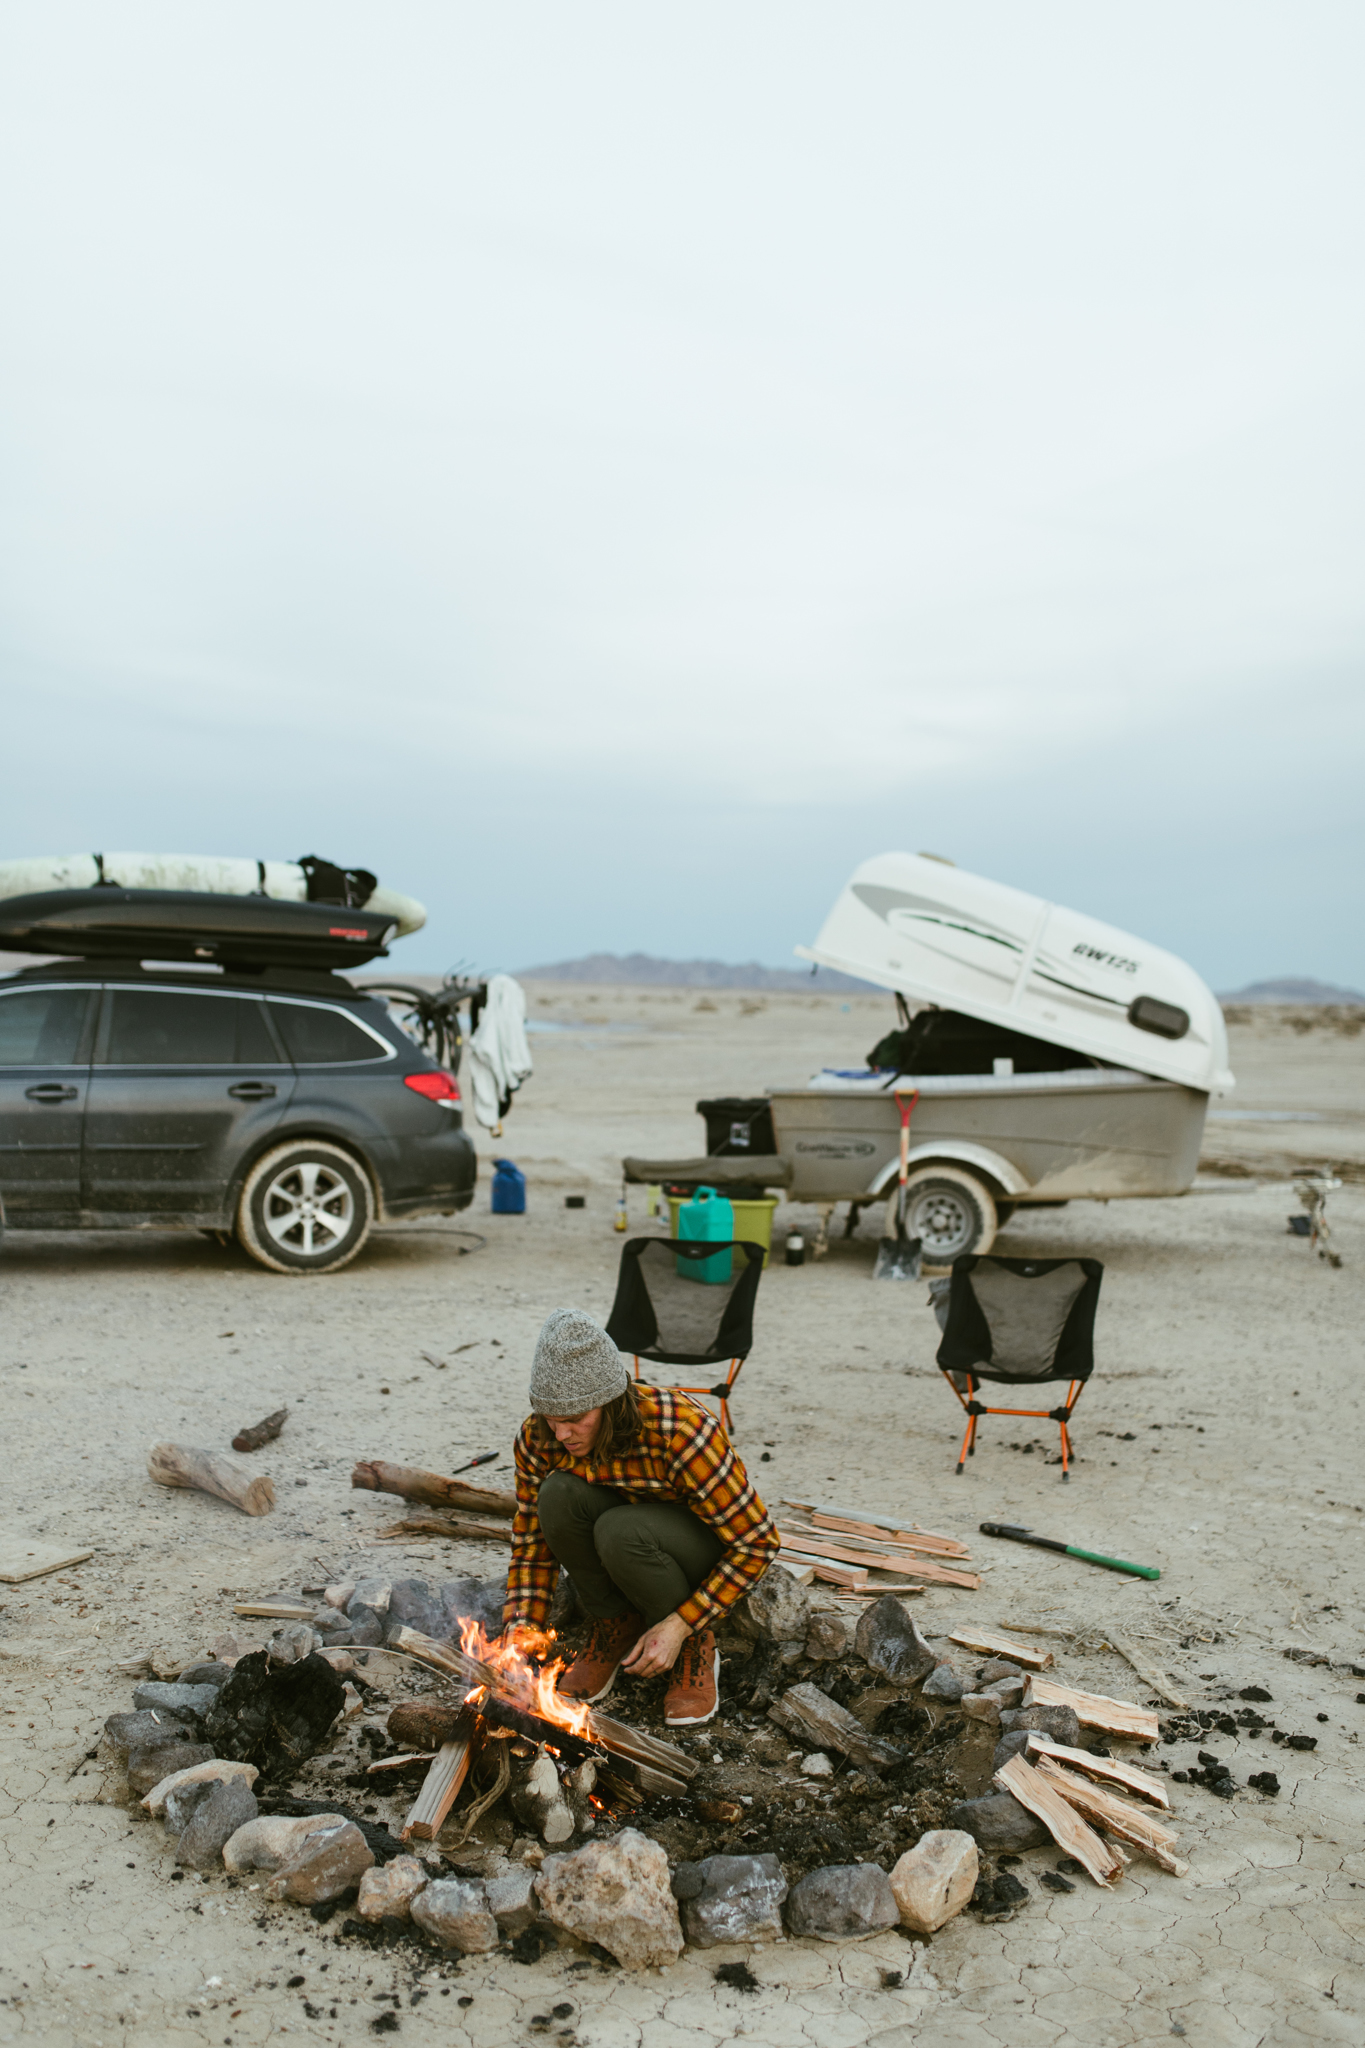 camping in california | utah and california adventure elopement photographers | the hearnes adventure photography | www.thehearnes.com